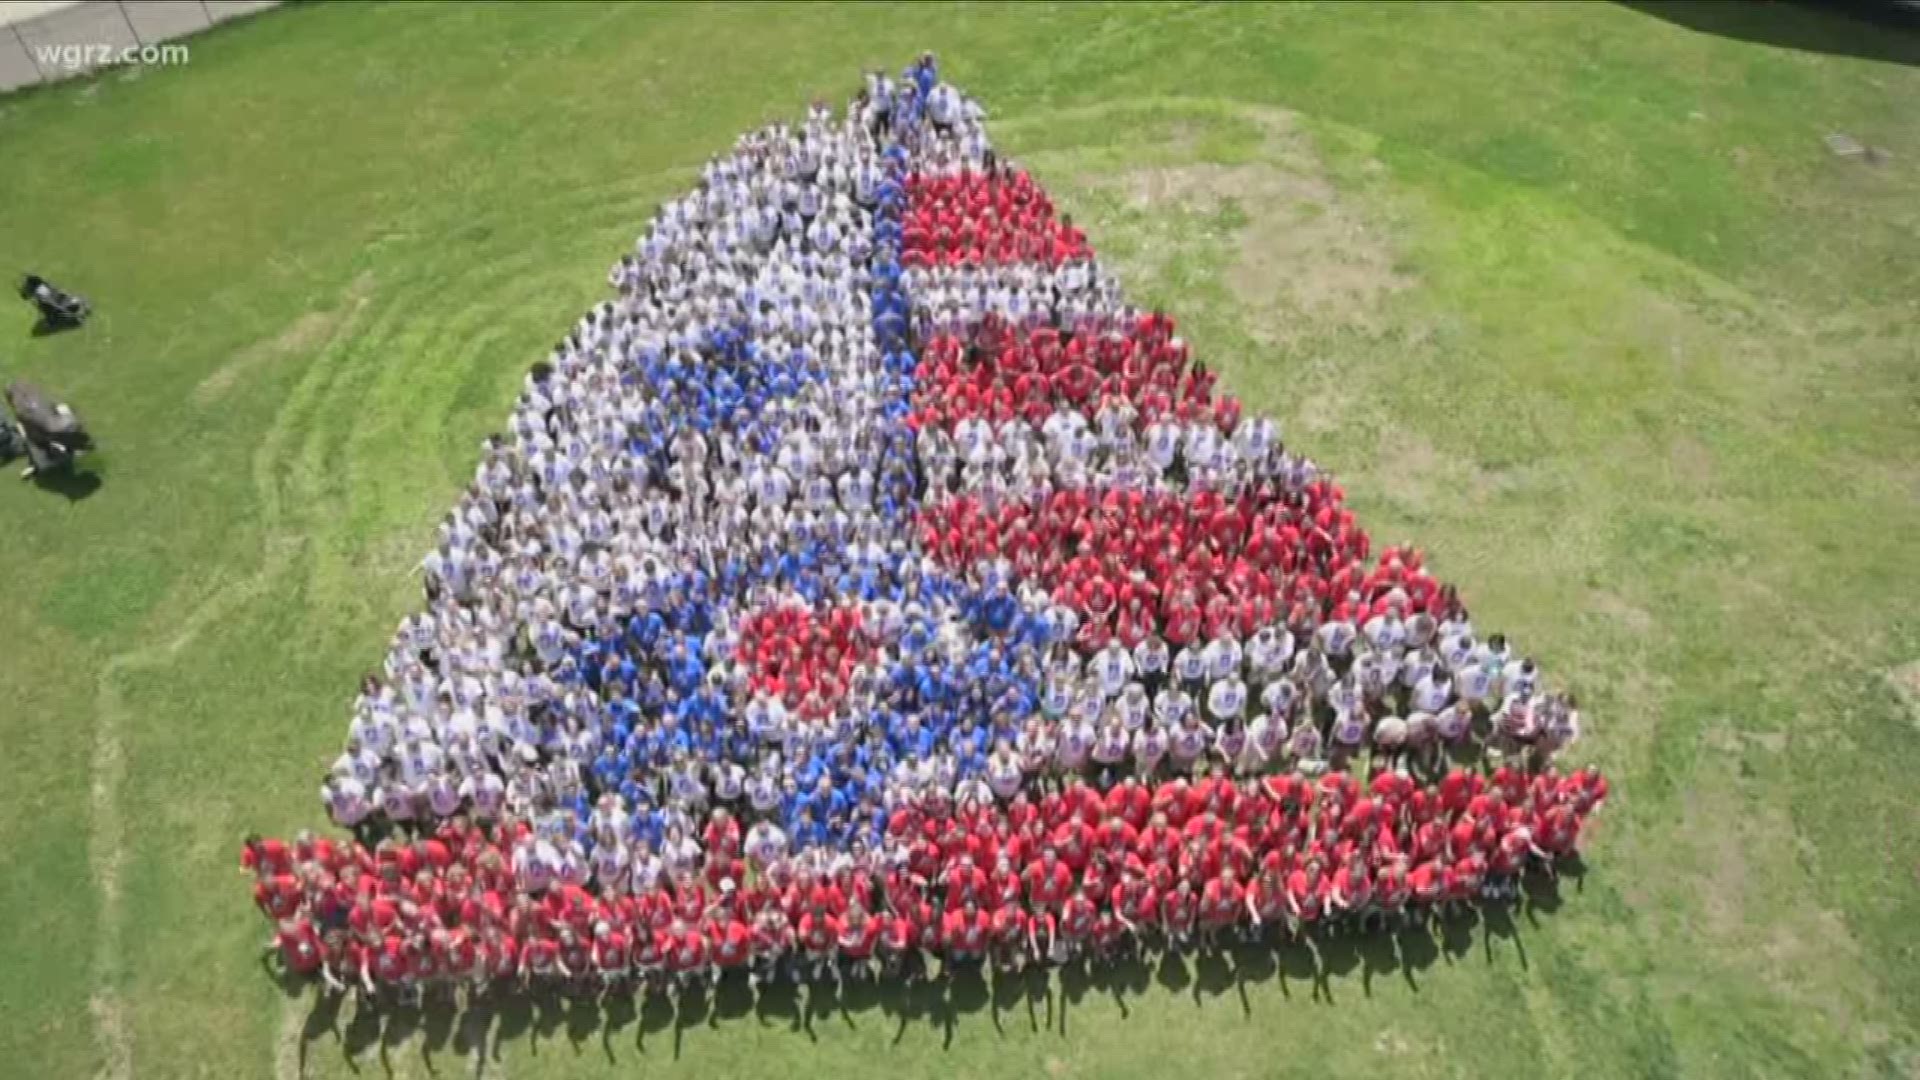 Hundreds of people stood to form the shape of something representing the Queen City.